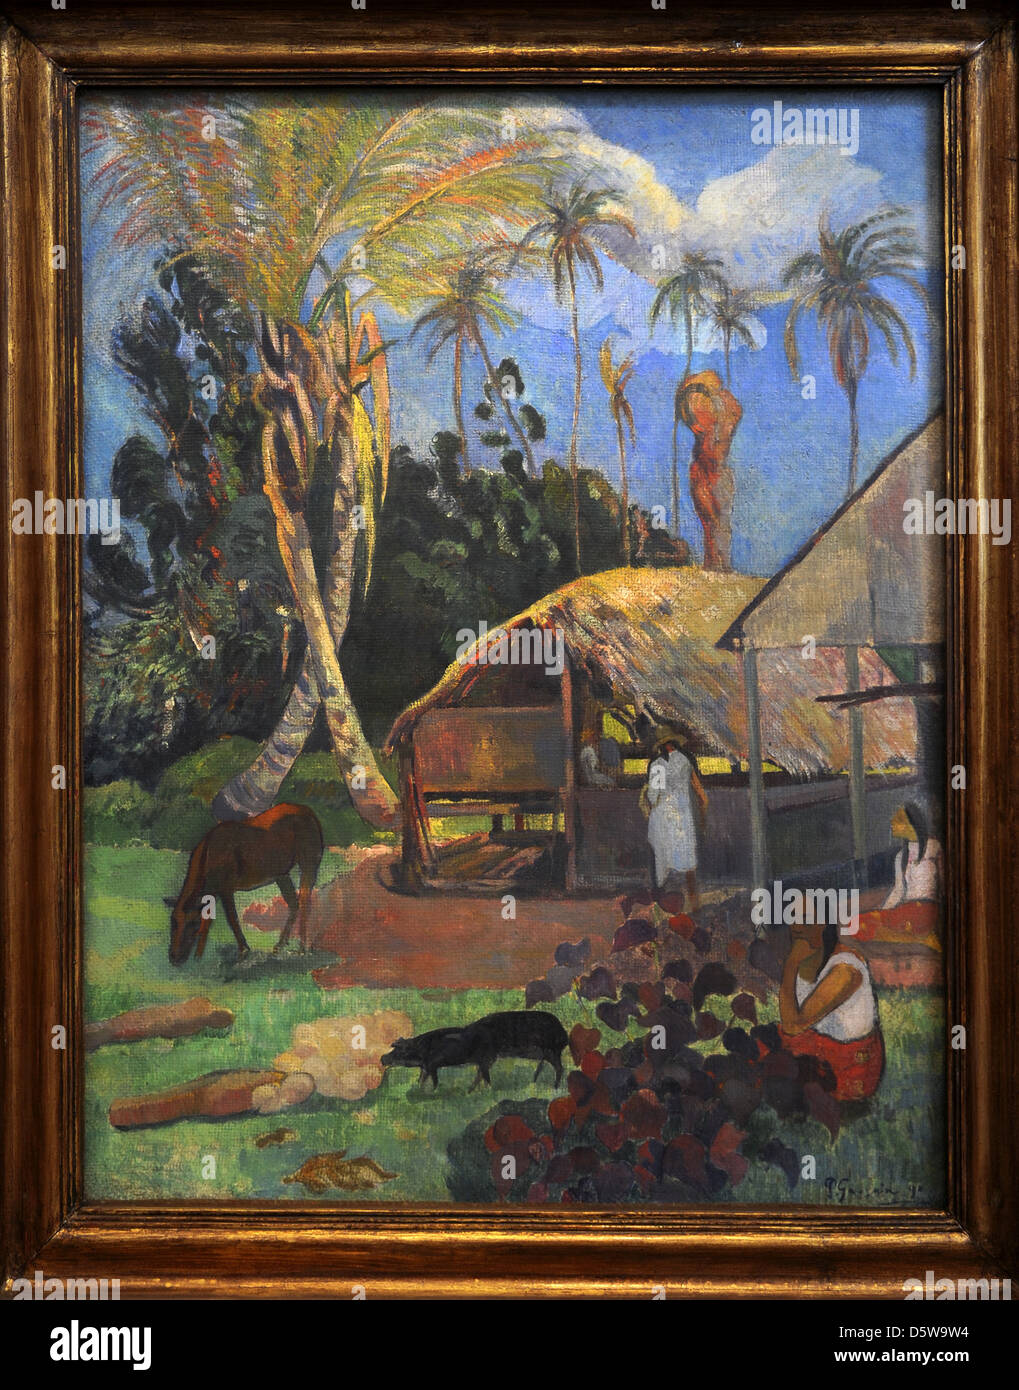 Paul Gauguin (1848-1903). French painter. Black Pigs, 1891. Oil on Canvas, 1st Tahiti Period. Museum of Fine Arts. Budapest. Stock Photo